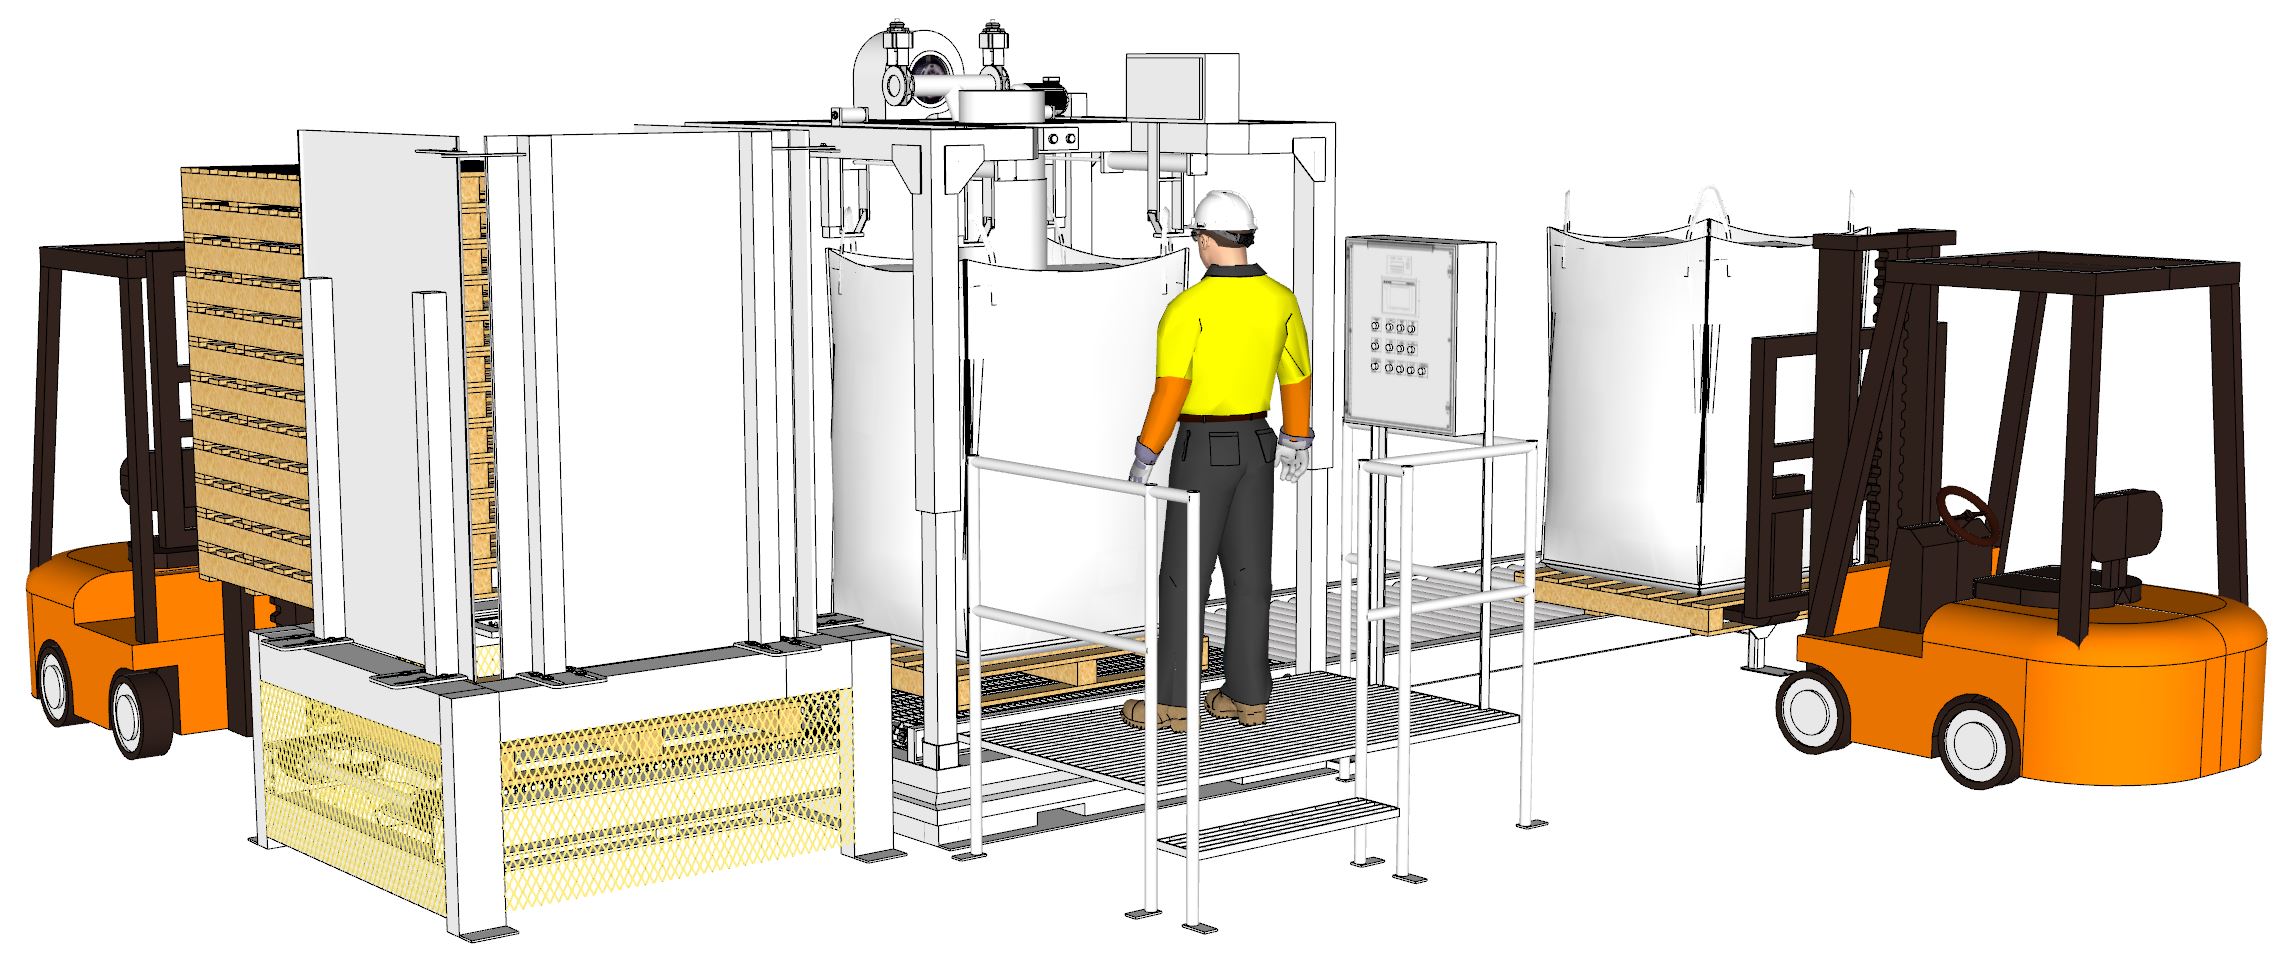 USS High-Rate Bulk Bag Filling Station with USS Pallet Dispenser and Gravity Conveyor